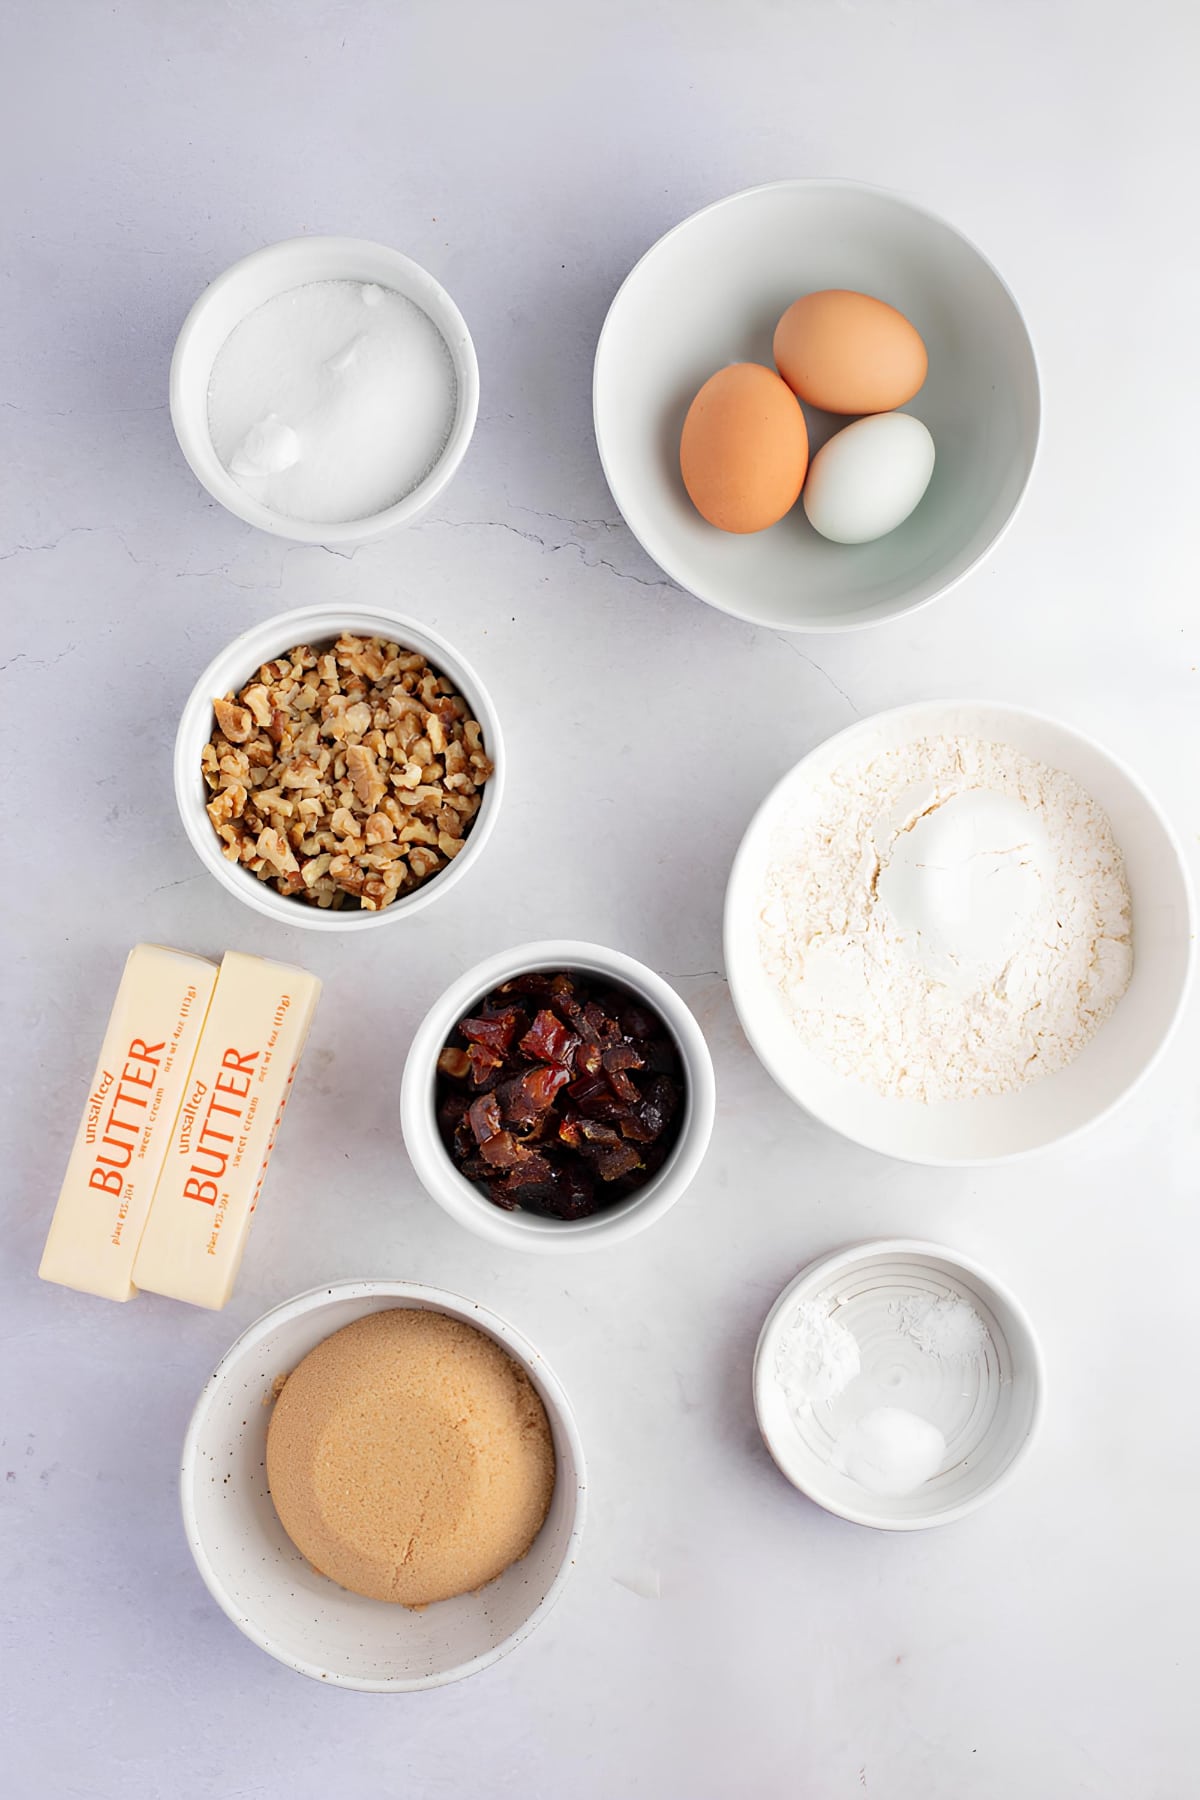 Food for the Gods ingredients- eggs, sugar, dates, chopped walnuts, butter and flour flat lay on a white table surface.